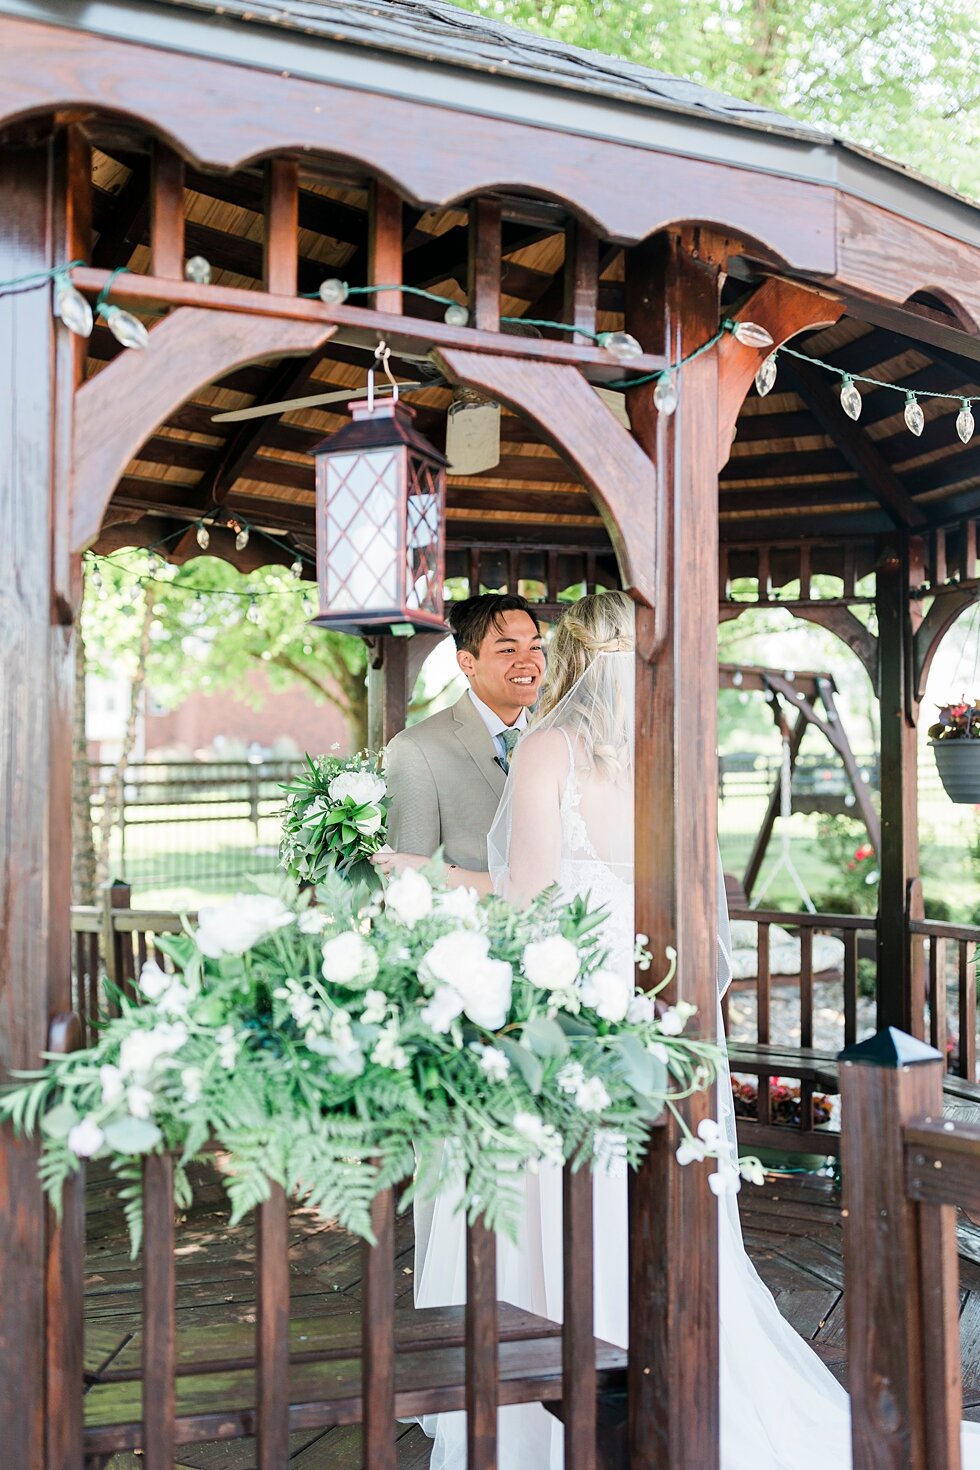  Natural lighting and natural colors helped accent this couple as they met under this beautiful gazebo! Romantic casual lace wedding gown close friends neutral colors background wedding natural greenery crisp white #midwestphotographer #kywedding #lo